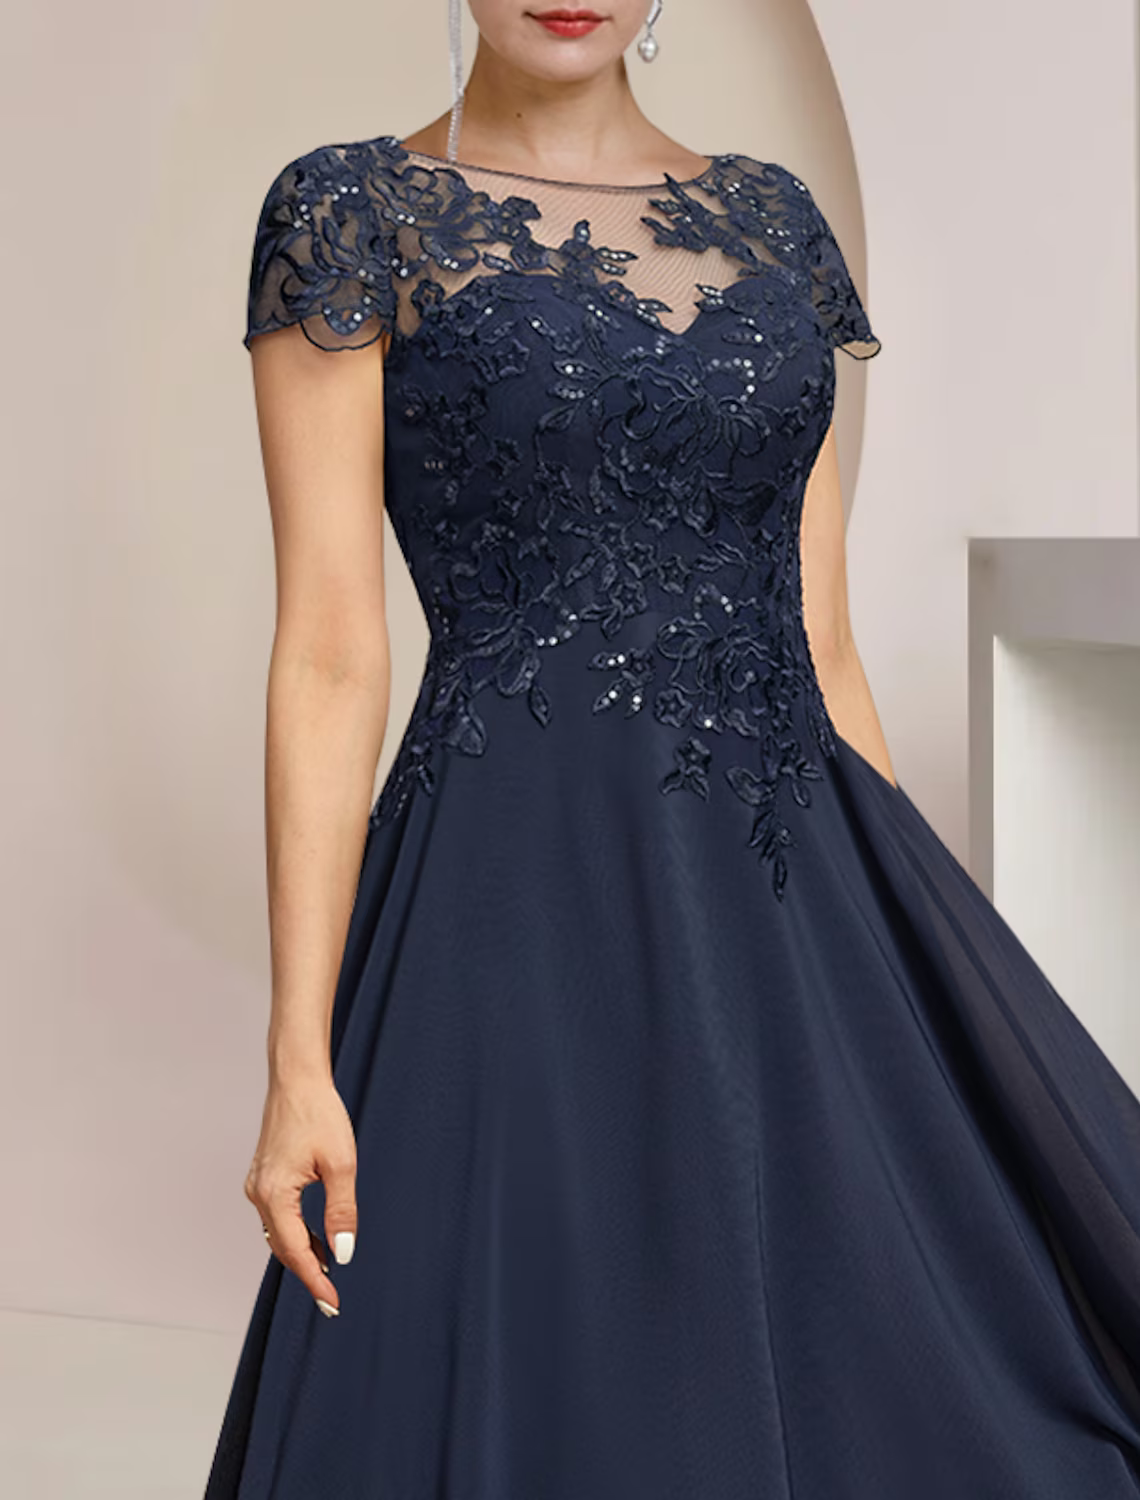 A-Line Mother of the Bride Dress Formal Wedding Guest Elegant High Low Scoop Neck Asymmetrical Chiffon Lace Short Sleeve with Sequin Appliques